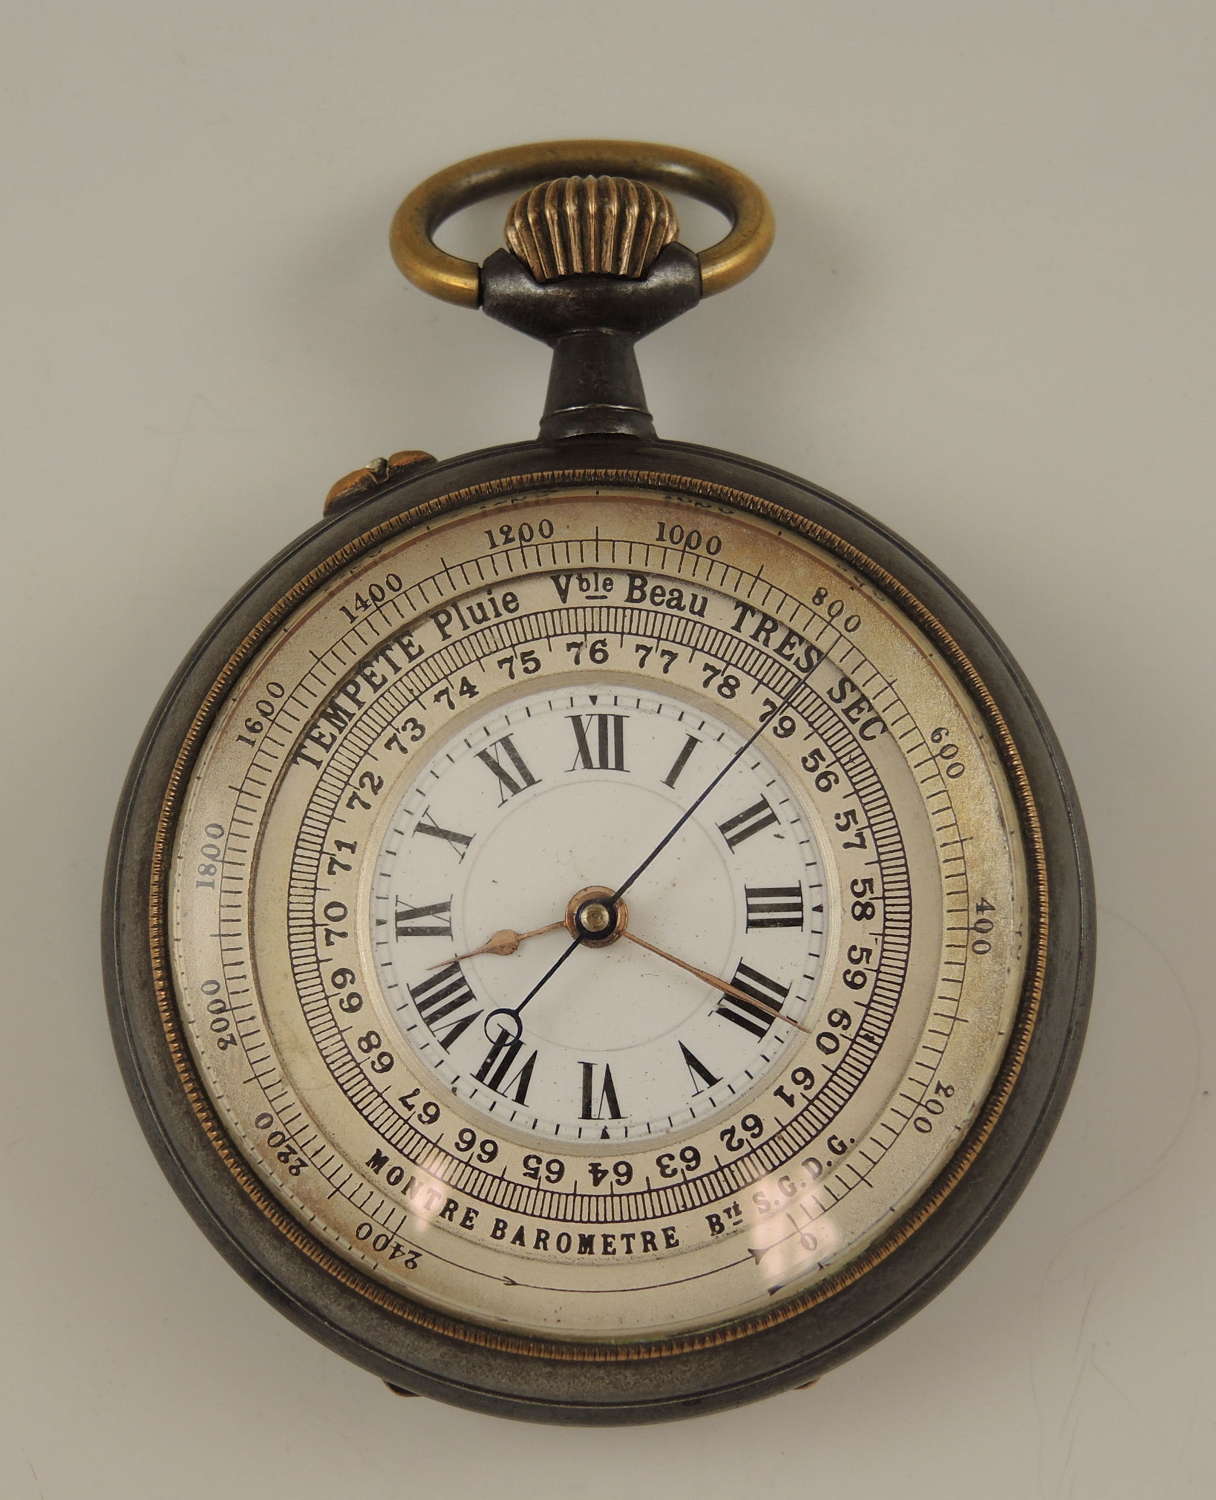 Rare antique pocket watch with a barometer function c1890